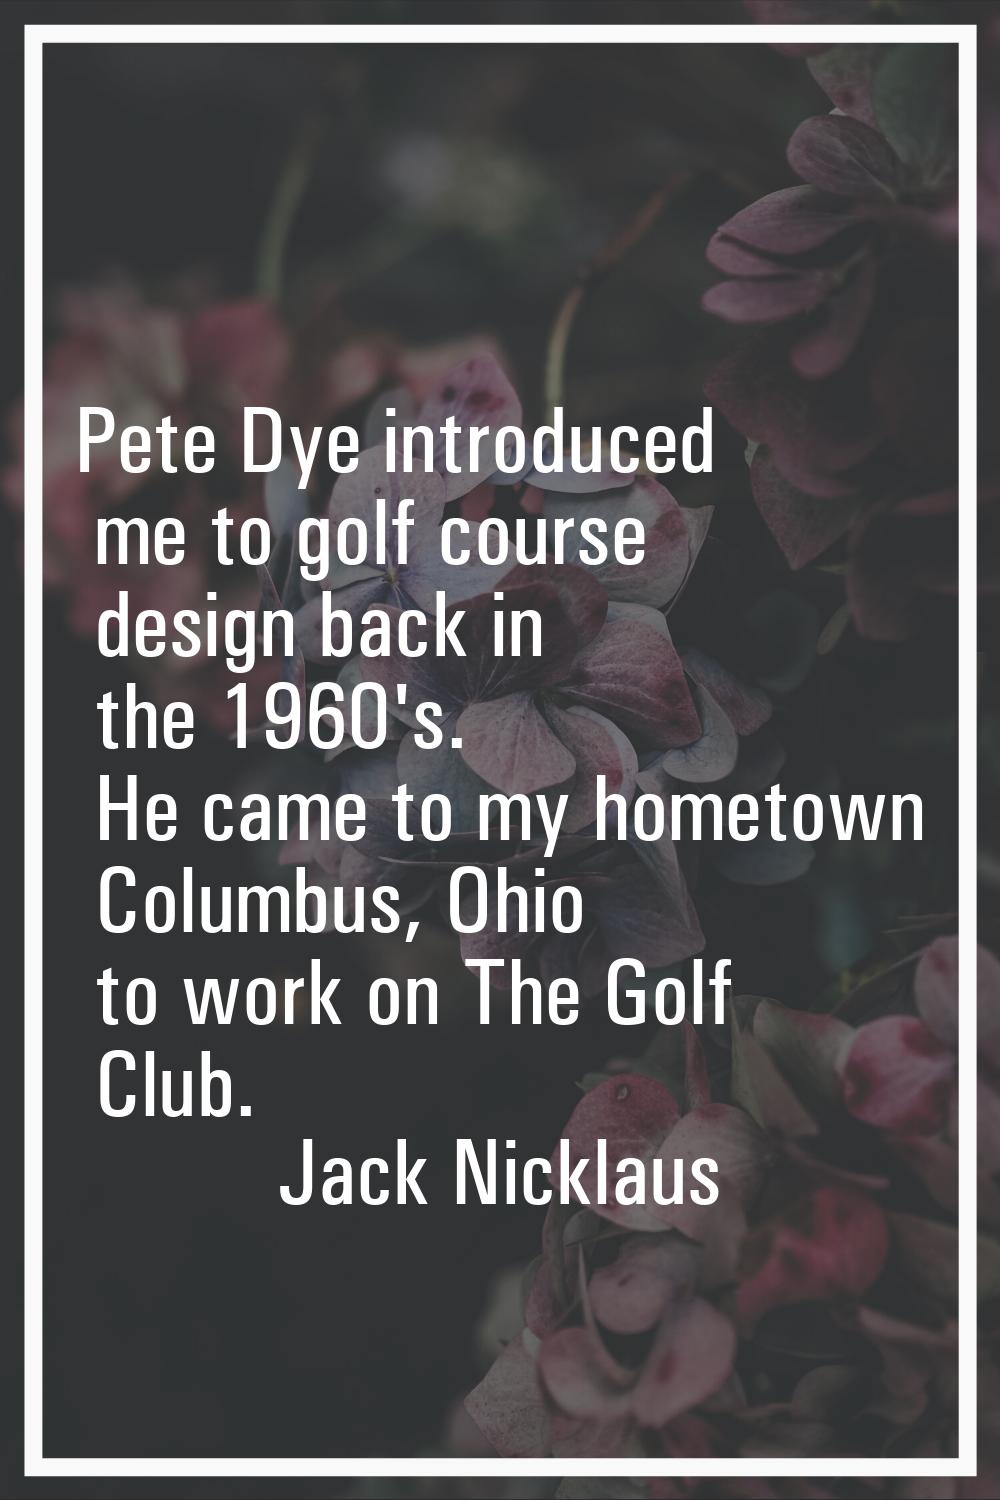 Pete Dye introduced me to golf course design back in the 1960's. He came to my hometown Columbus, O